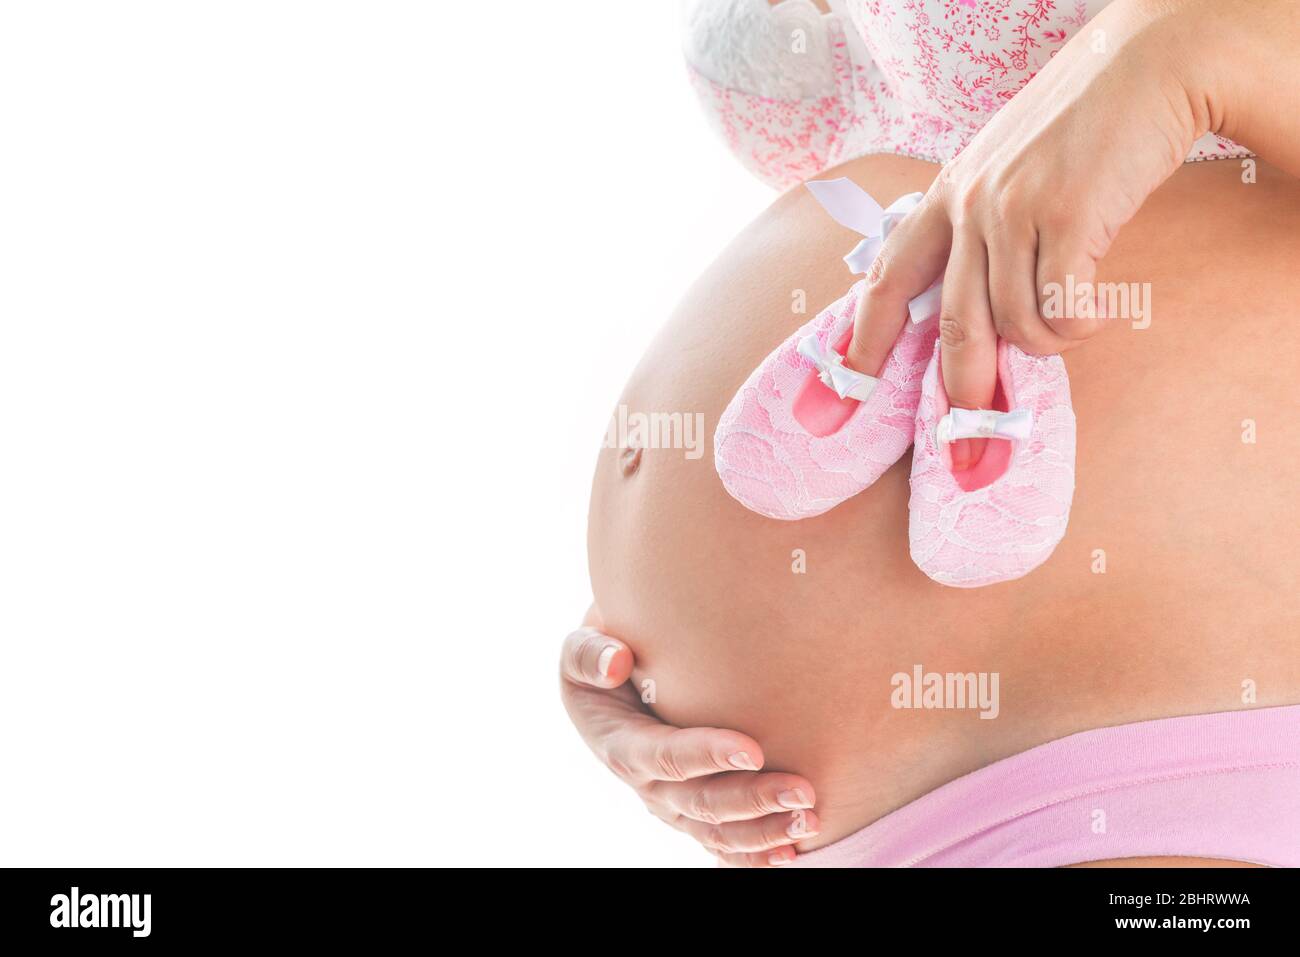 Close-up image of pregnant woman with pink babygirl shoes on her belly.  Isolated background. Maternity prenatal care and woman pregnancy concept  Stock Photo - Alamy